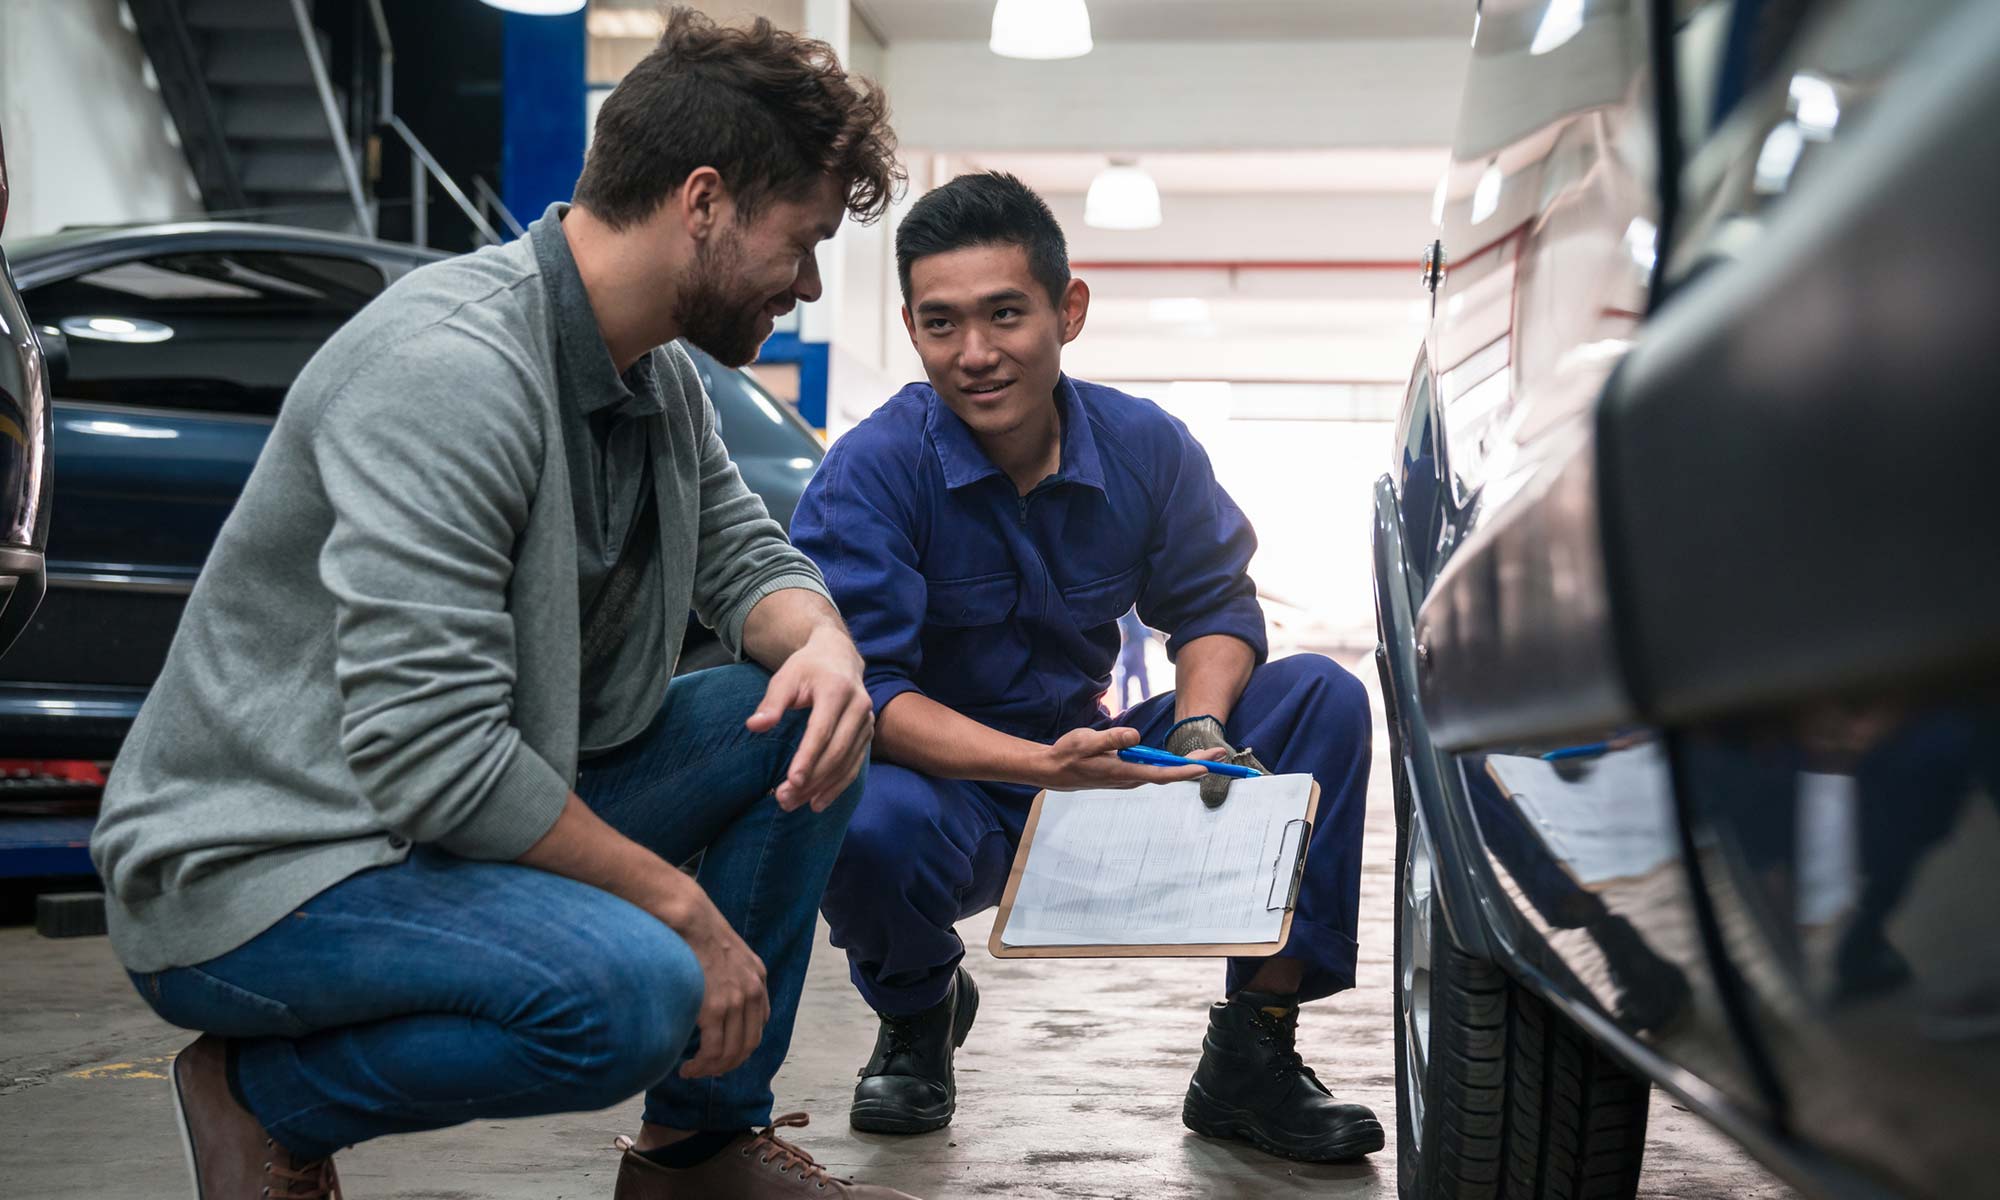 A car mechanic speaks with a customer about their car's brakes.